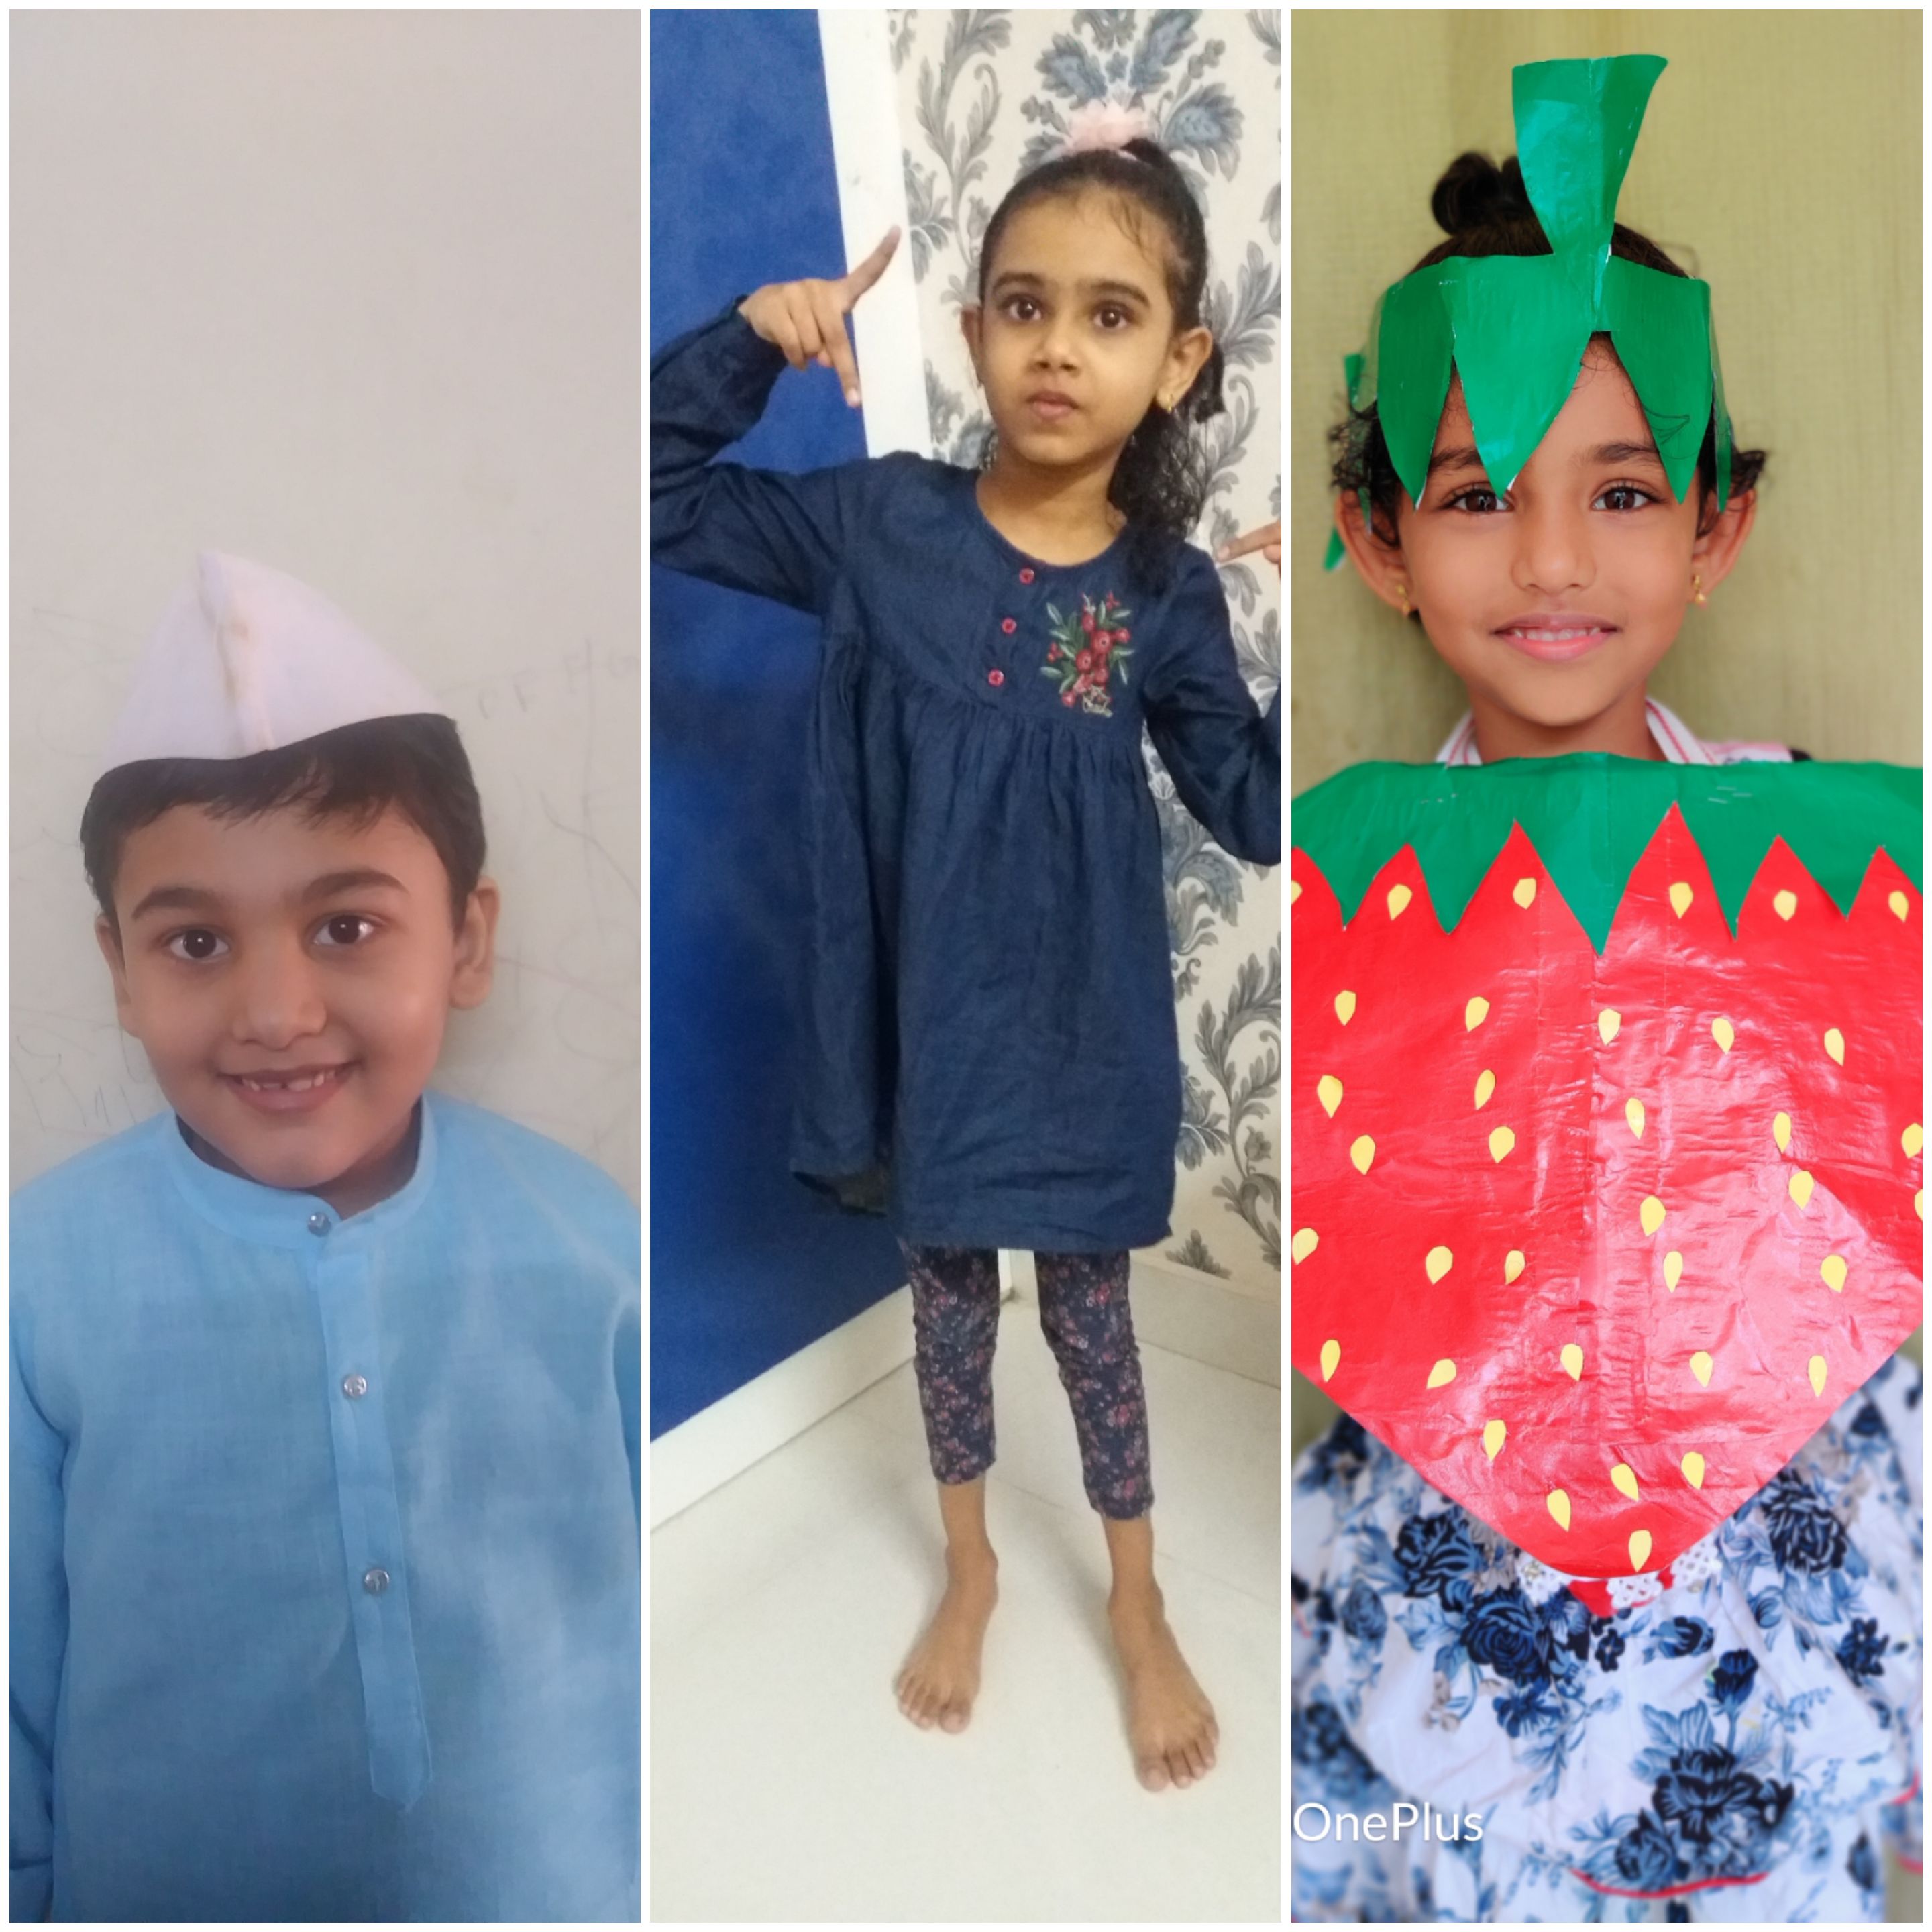 Childrens Day-Gr1 and Gr2